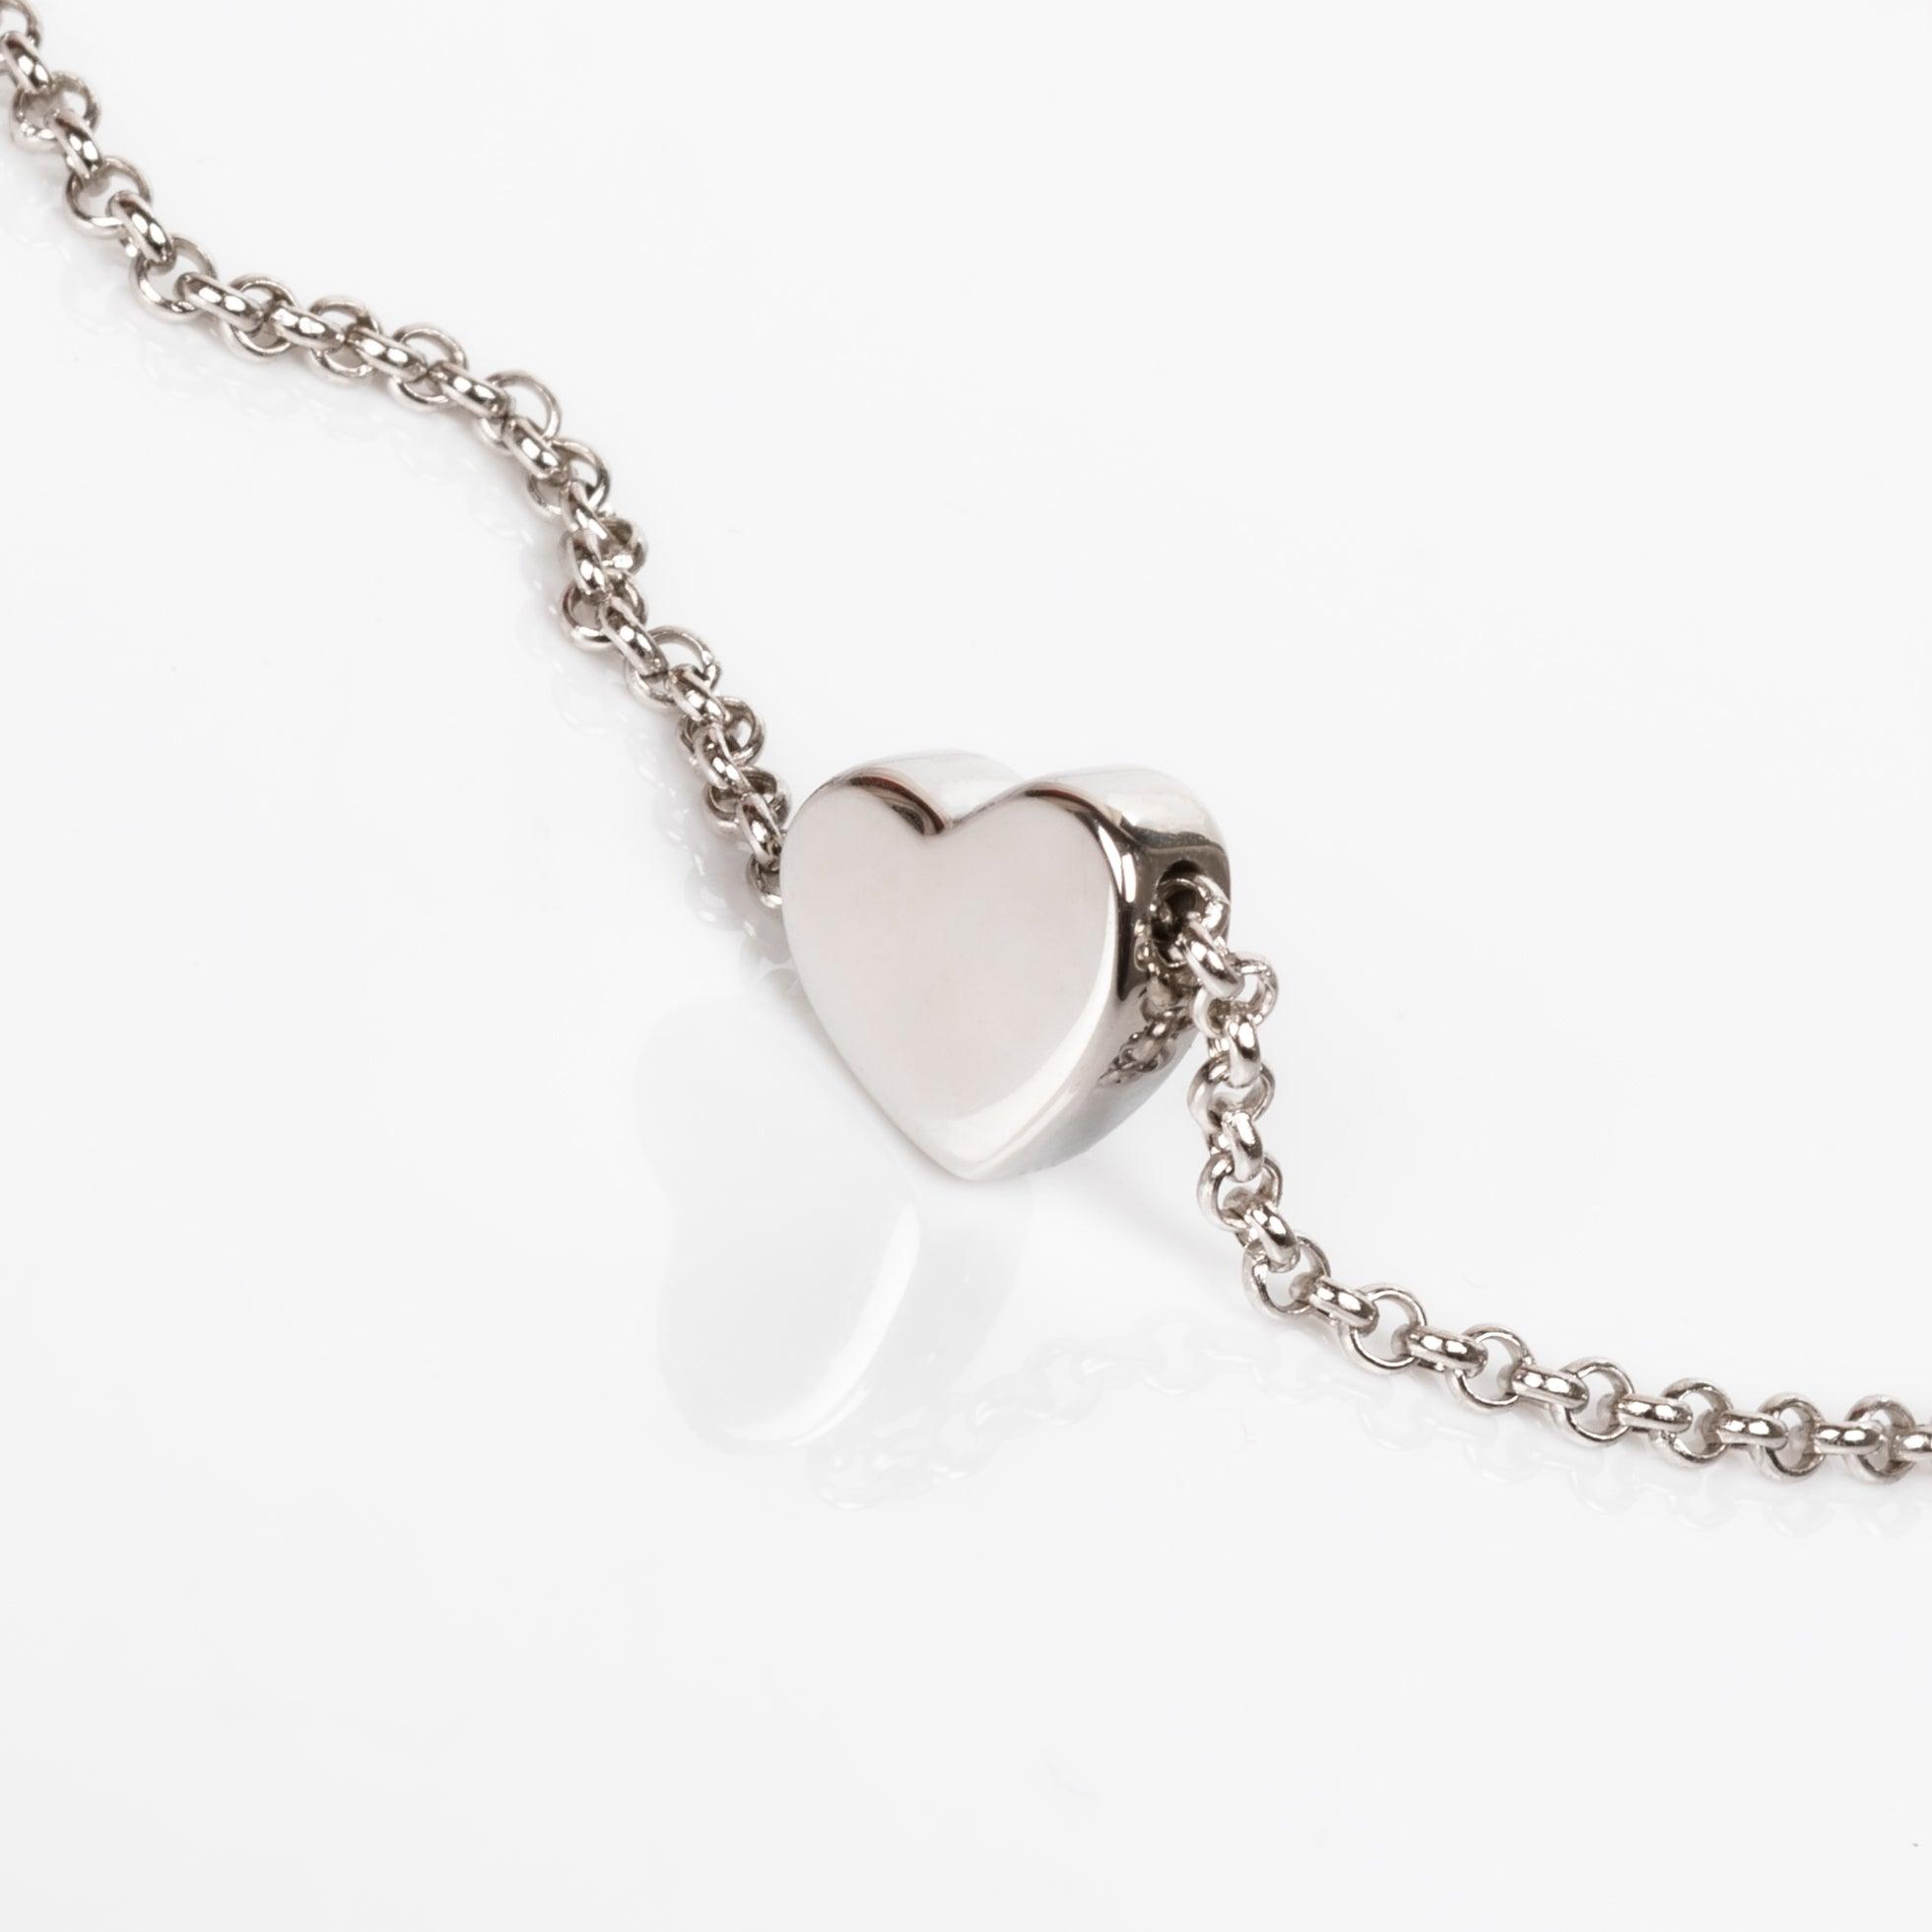 Heart Choker - Rose Gold and Silver - RUUD Studios